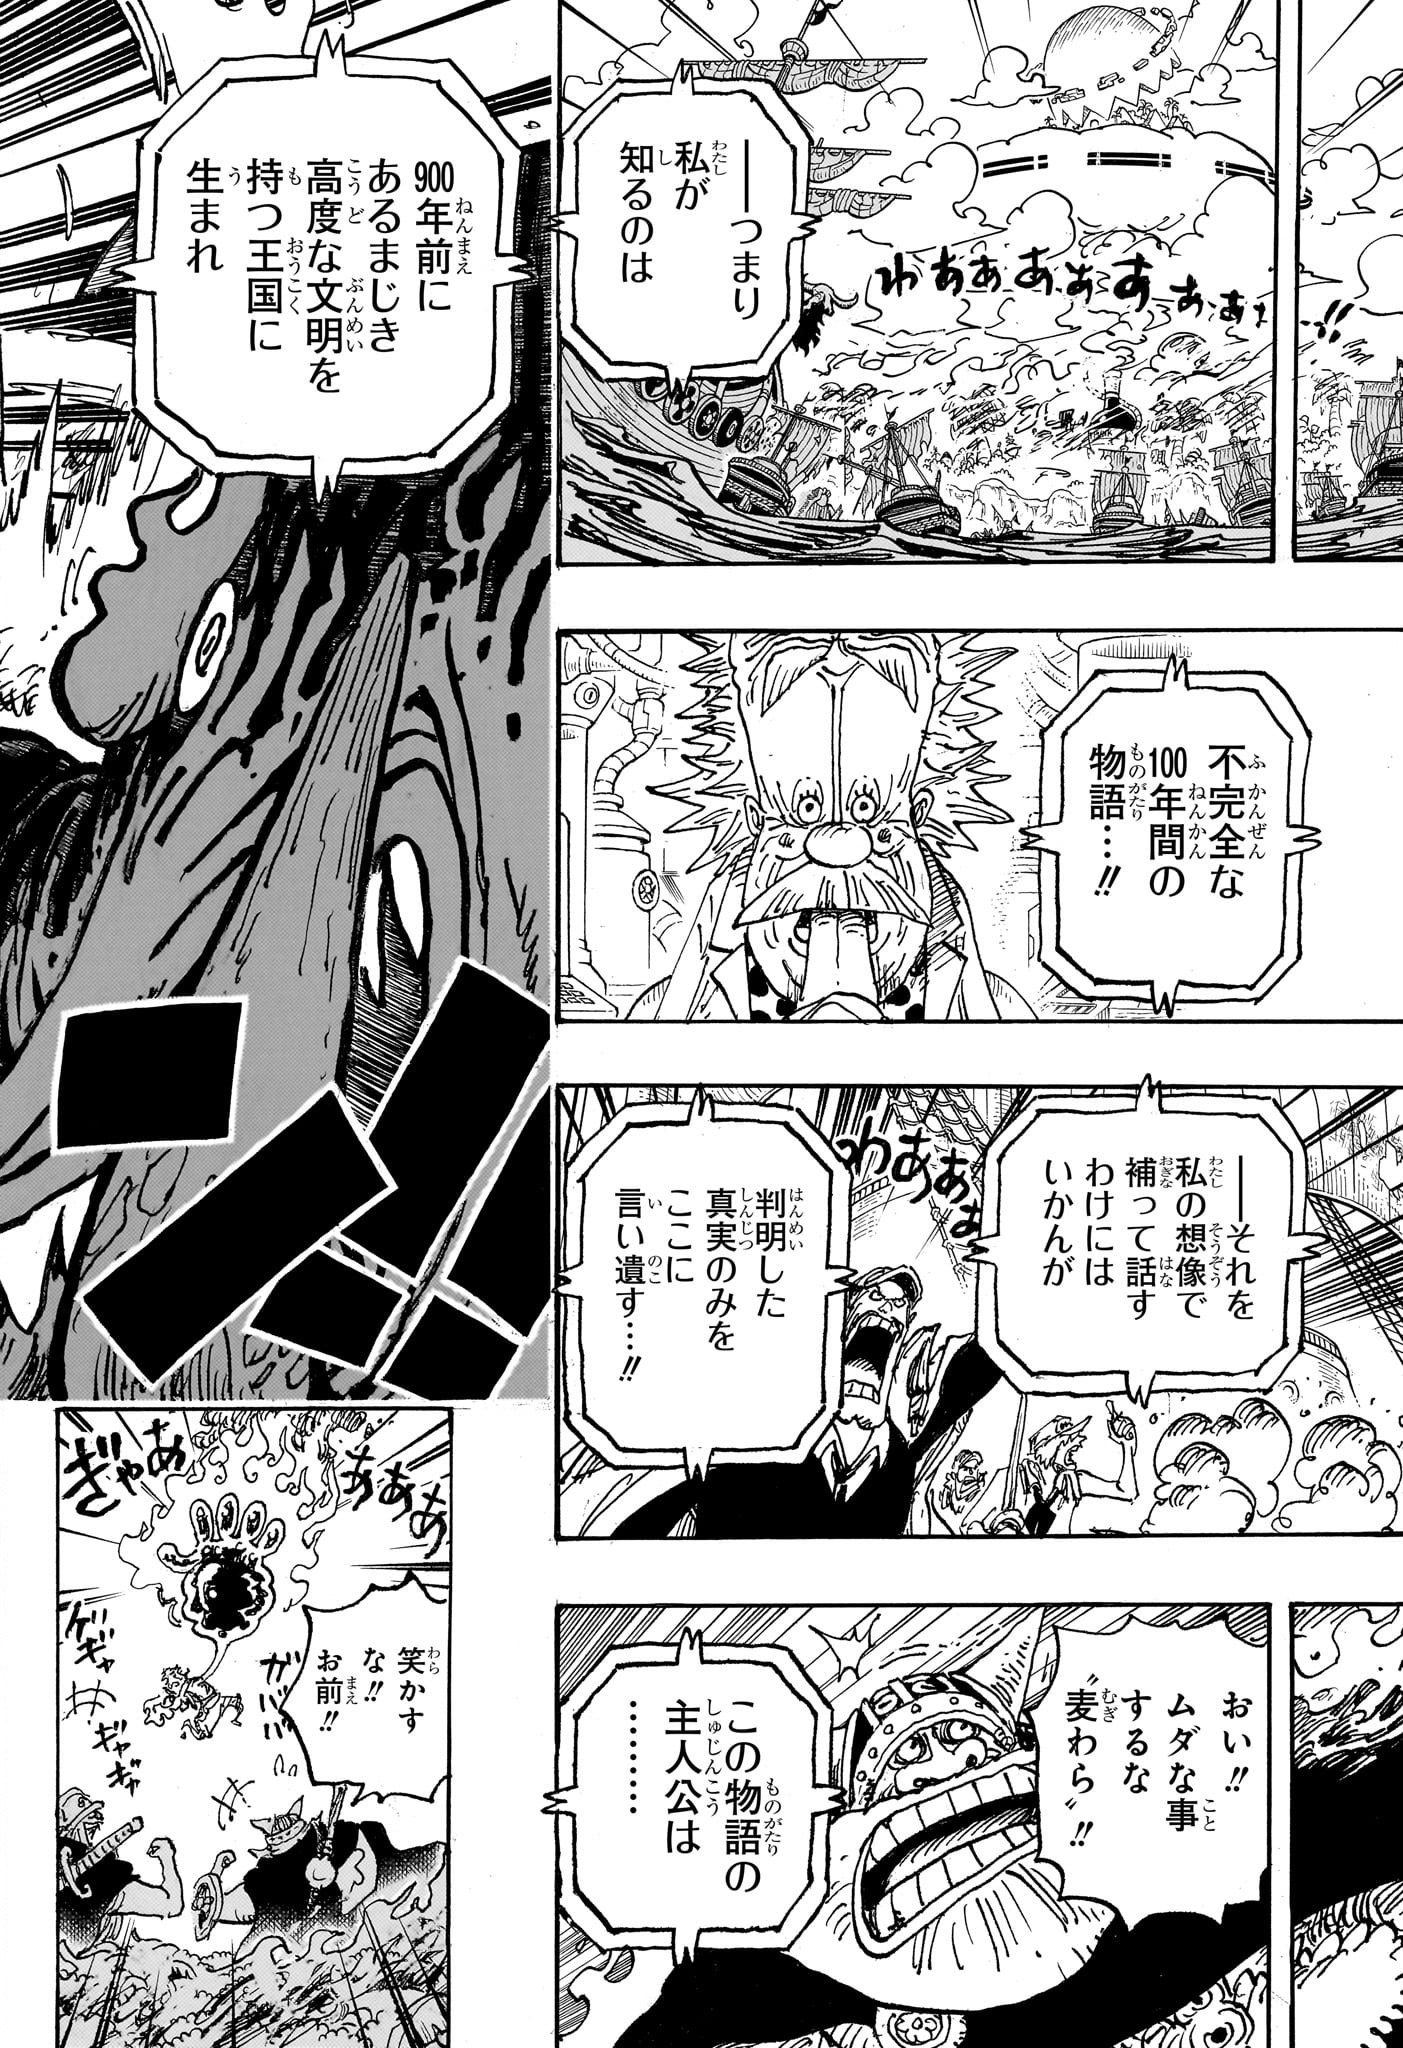 One Piece - Chapter 1114 - Page 14